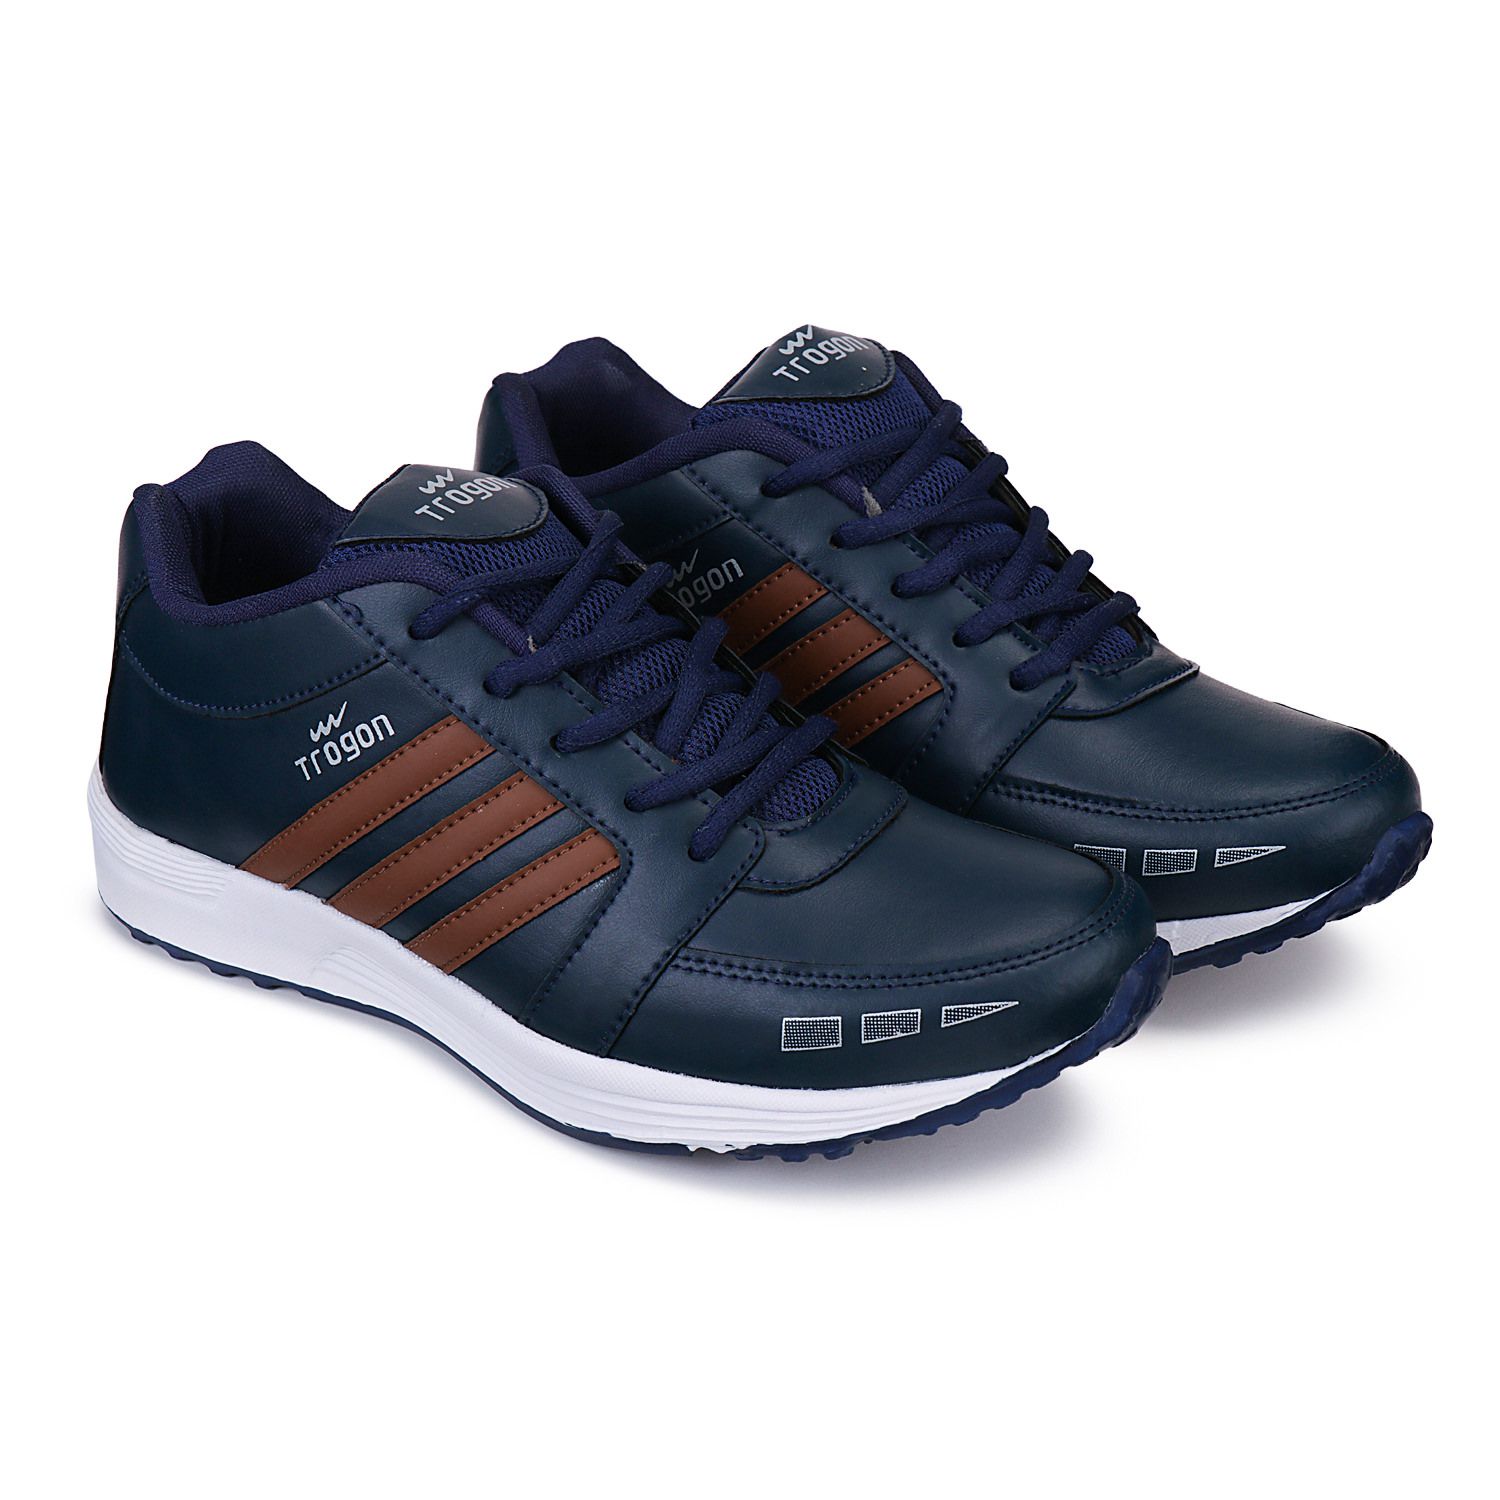 Airfly Running Shoe Running Shoes Blue 